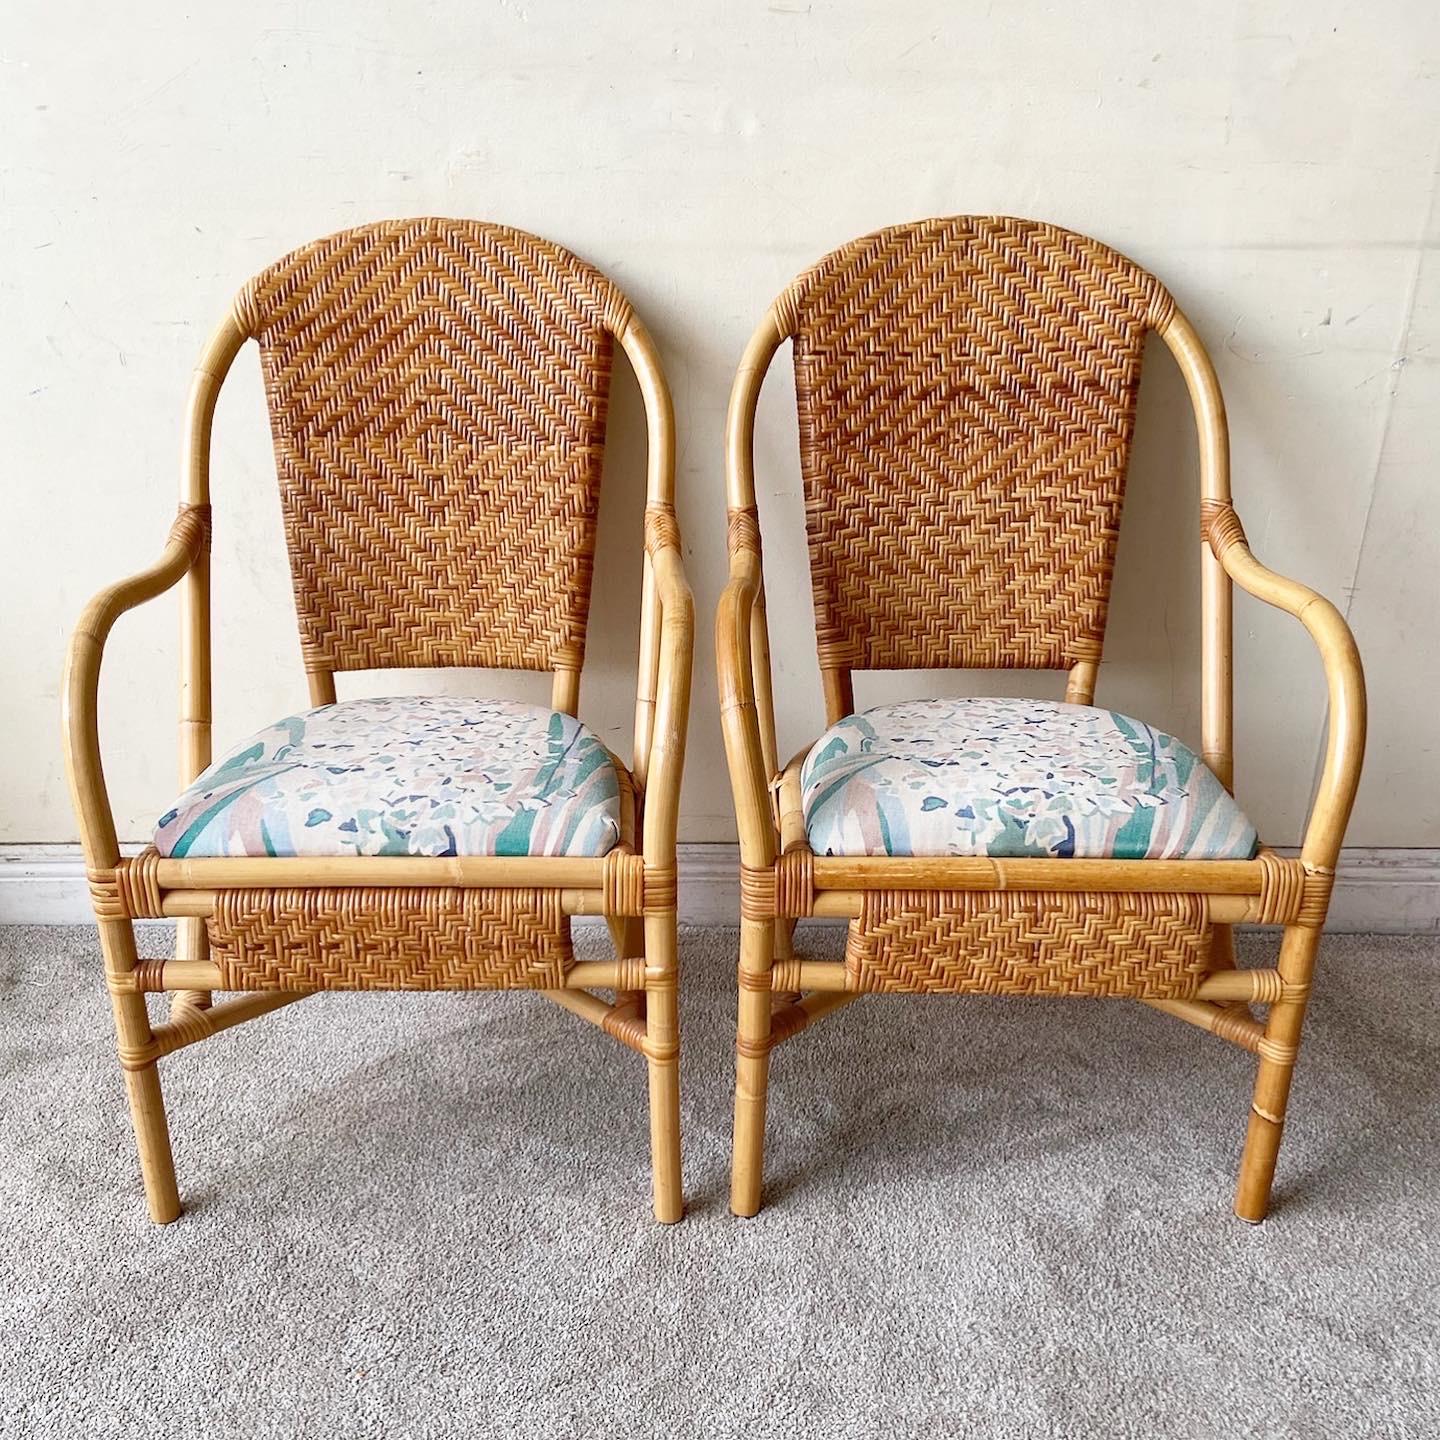 Amazing pair of vintage bohemian bamboo rattan and wicker arm chairs. Each feature a blue white and pink fabric seat cushion with a matching pillow.